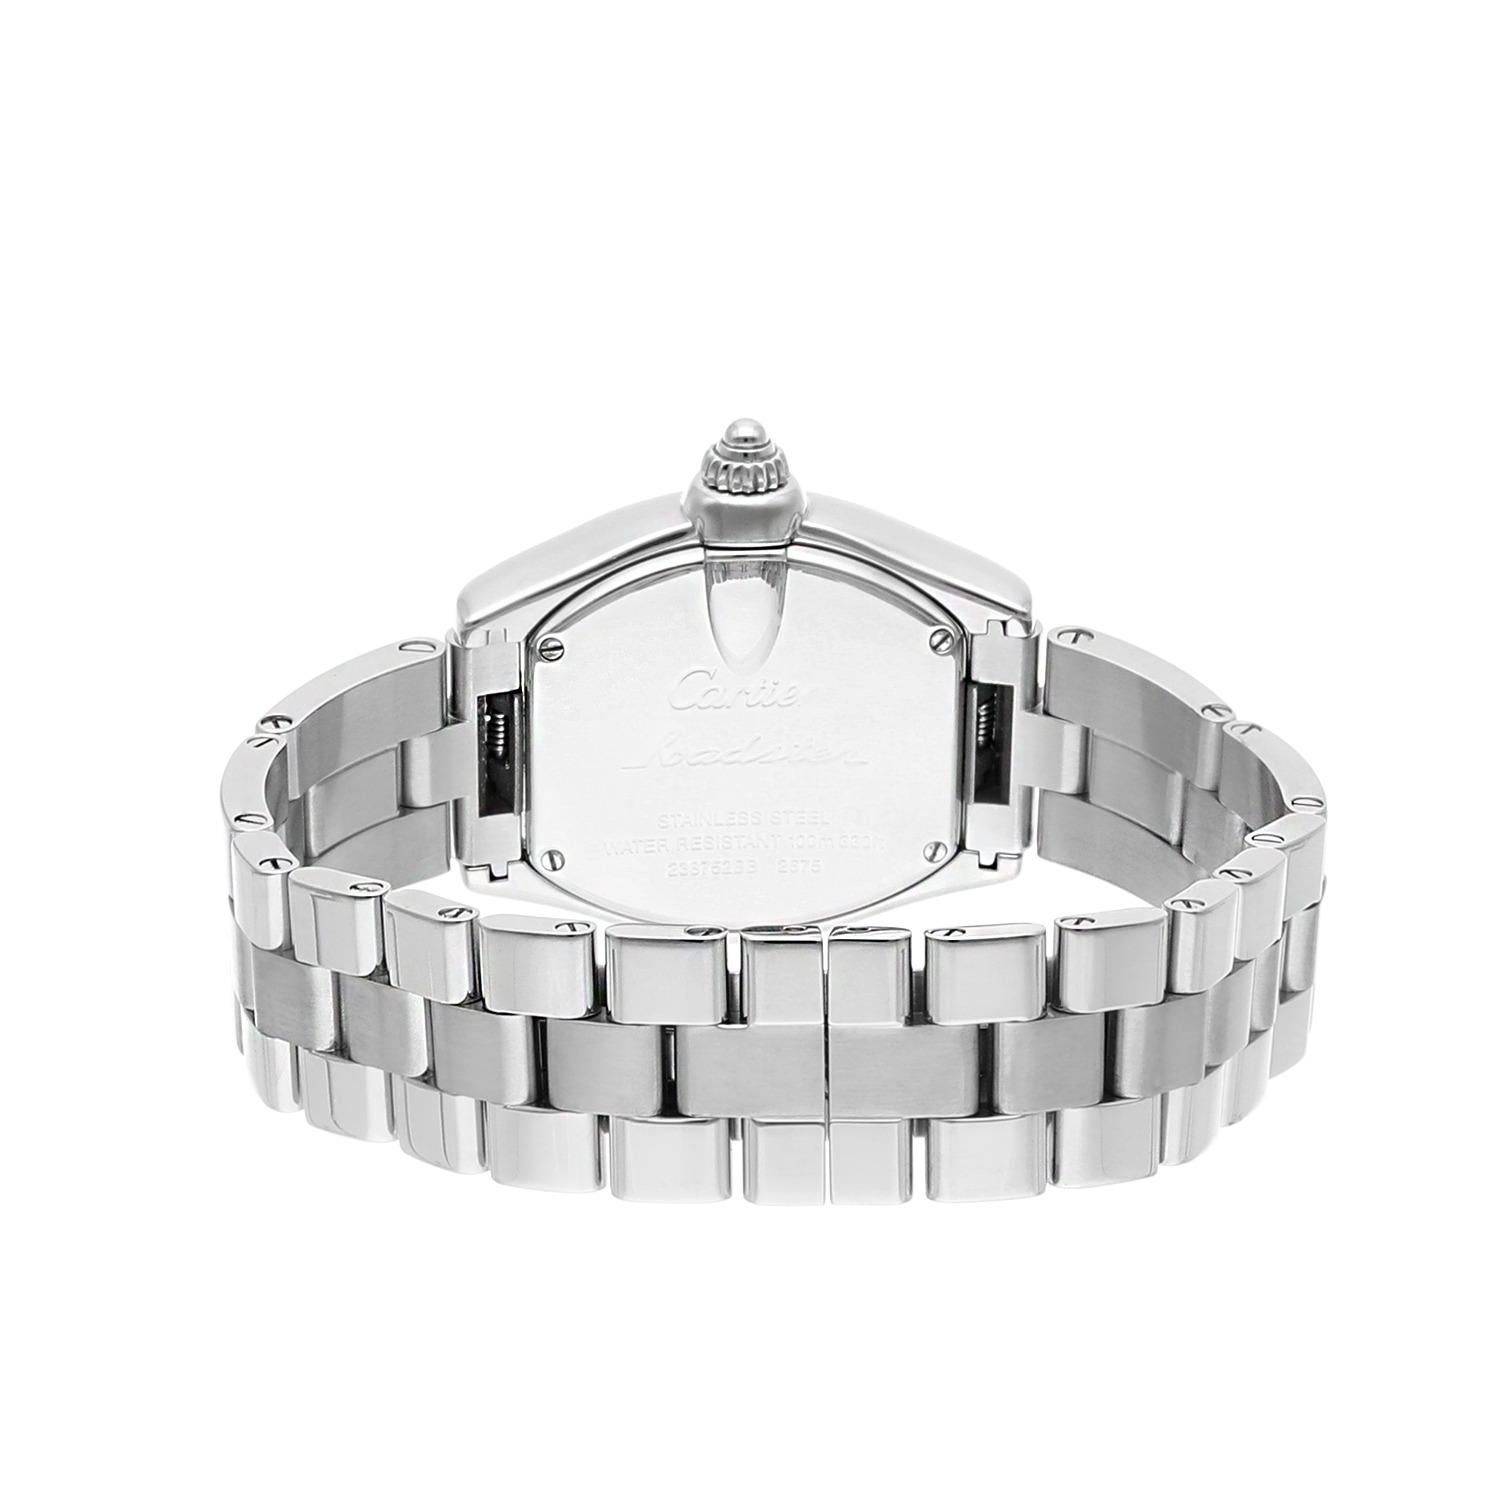 Cartier Roadster Ladies Silver Dial Stainless Steel Watch Diamond Bezel W62016V3 For Sale 1